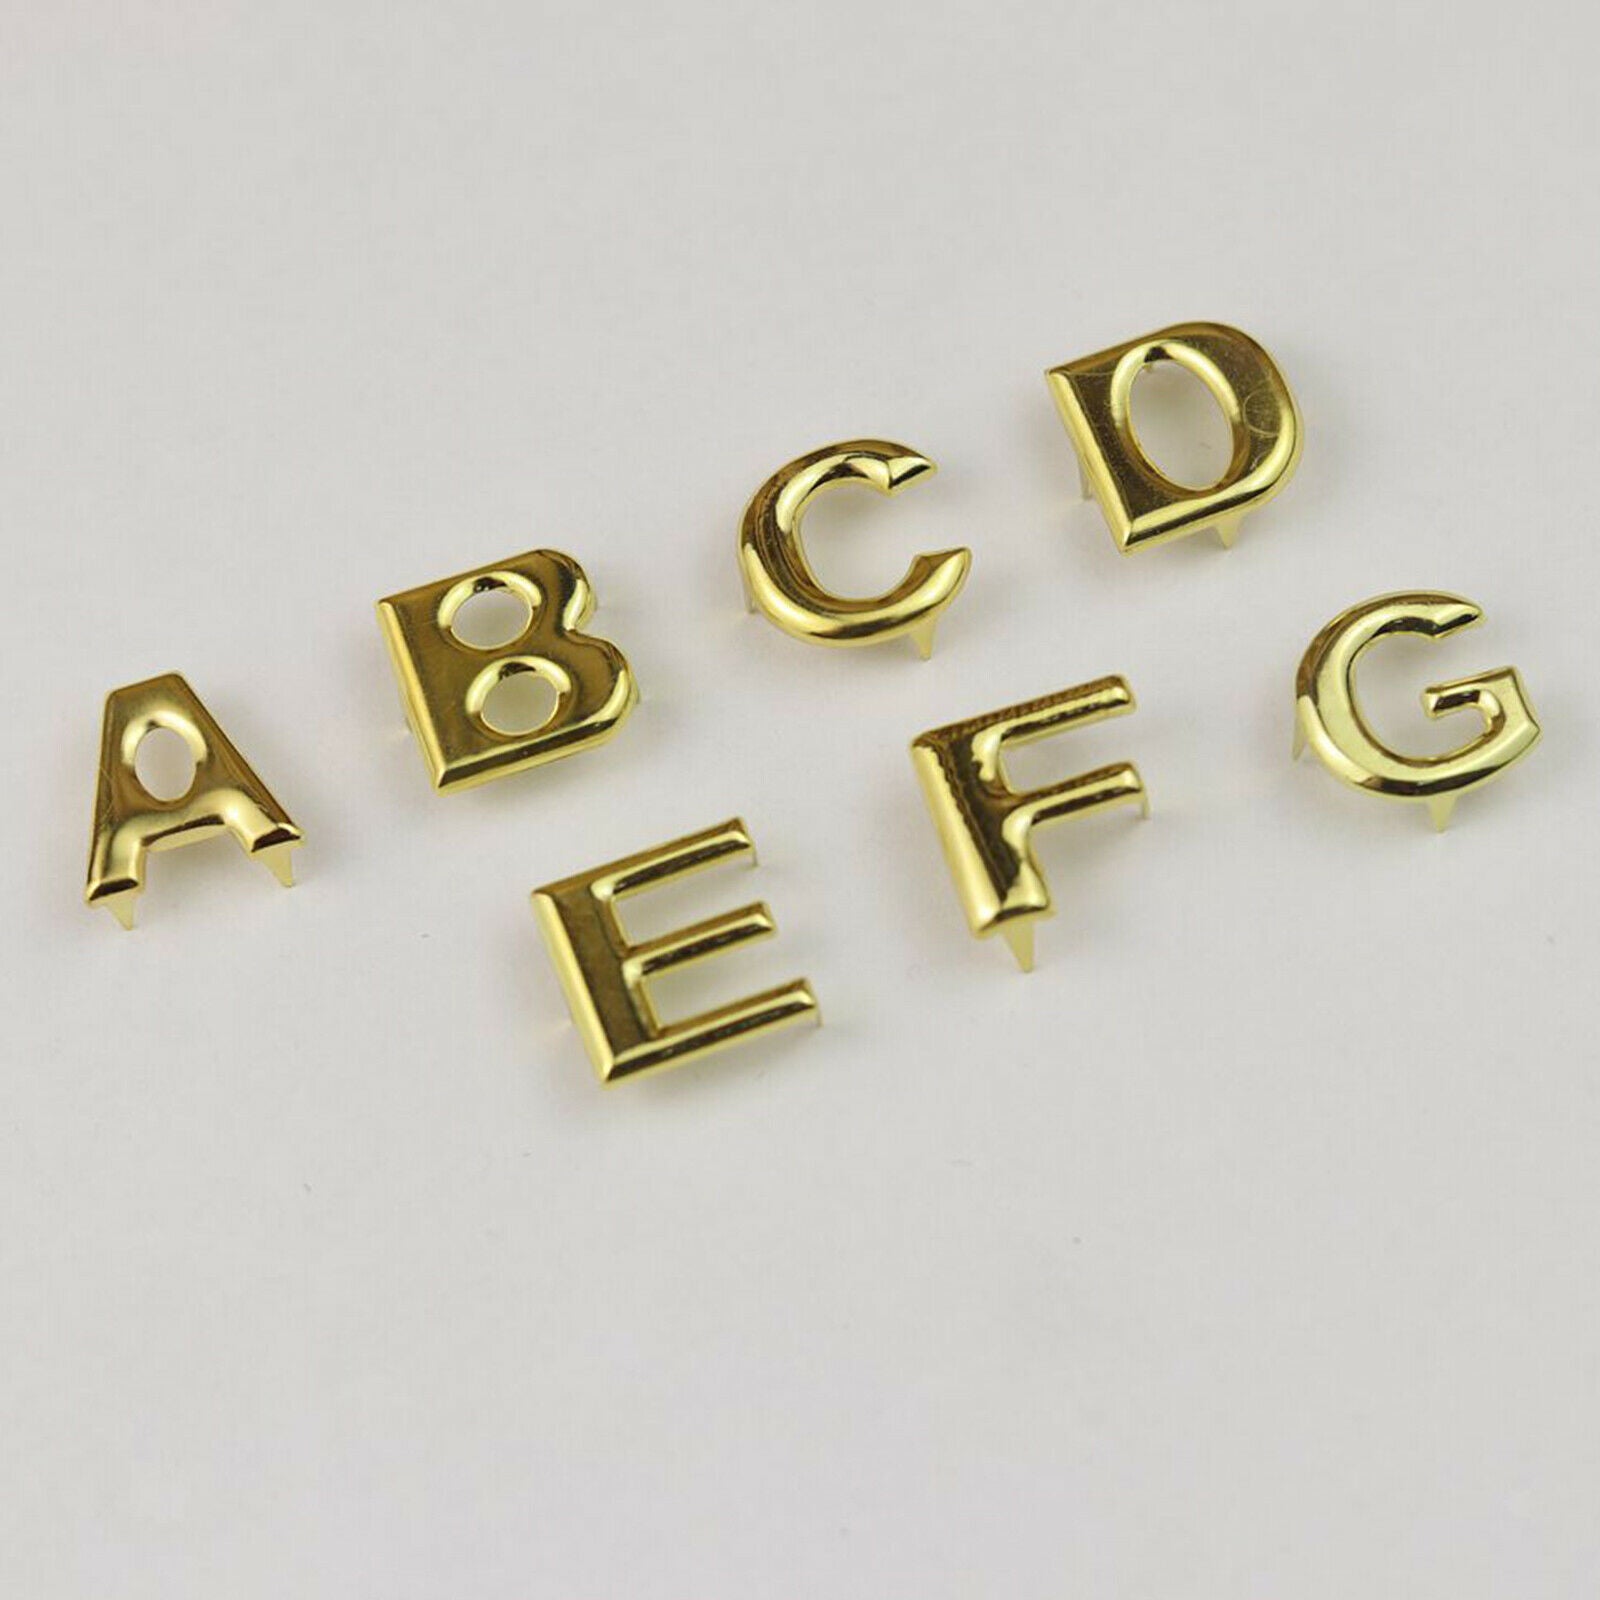 26Pcs DIY English Letter Metal Rivets Claw Studs Nailhead for Bags Clothes Hats